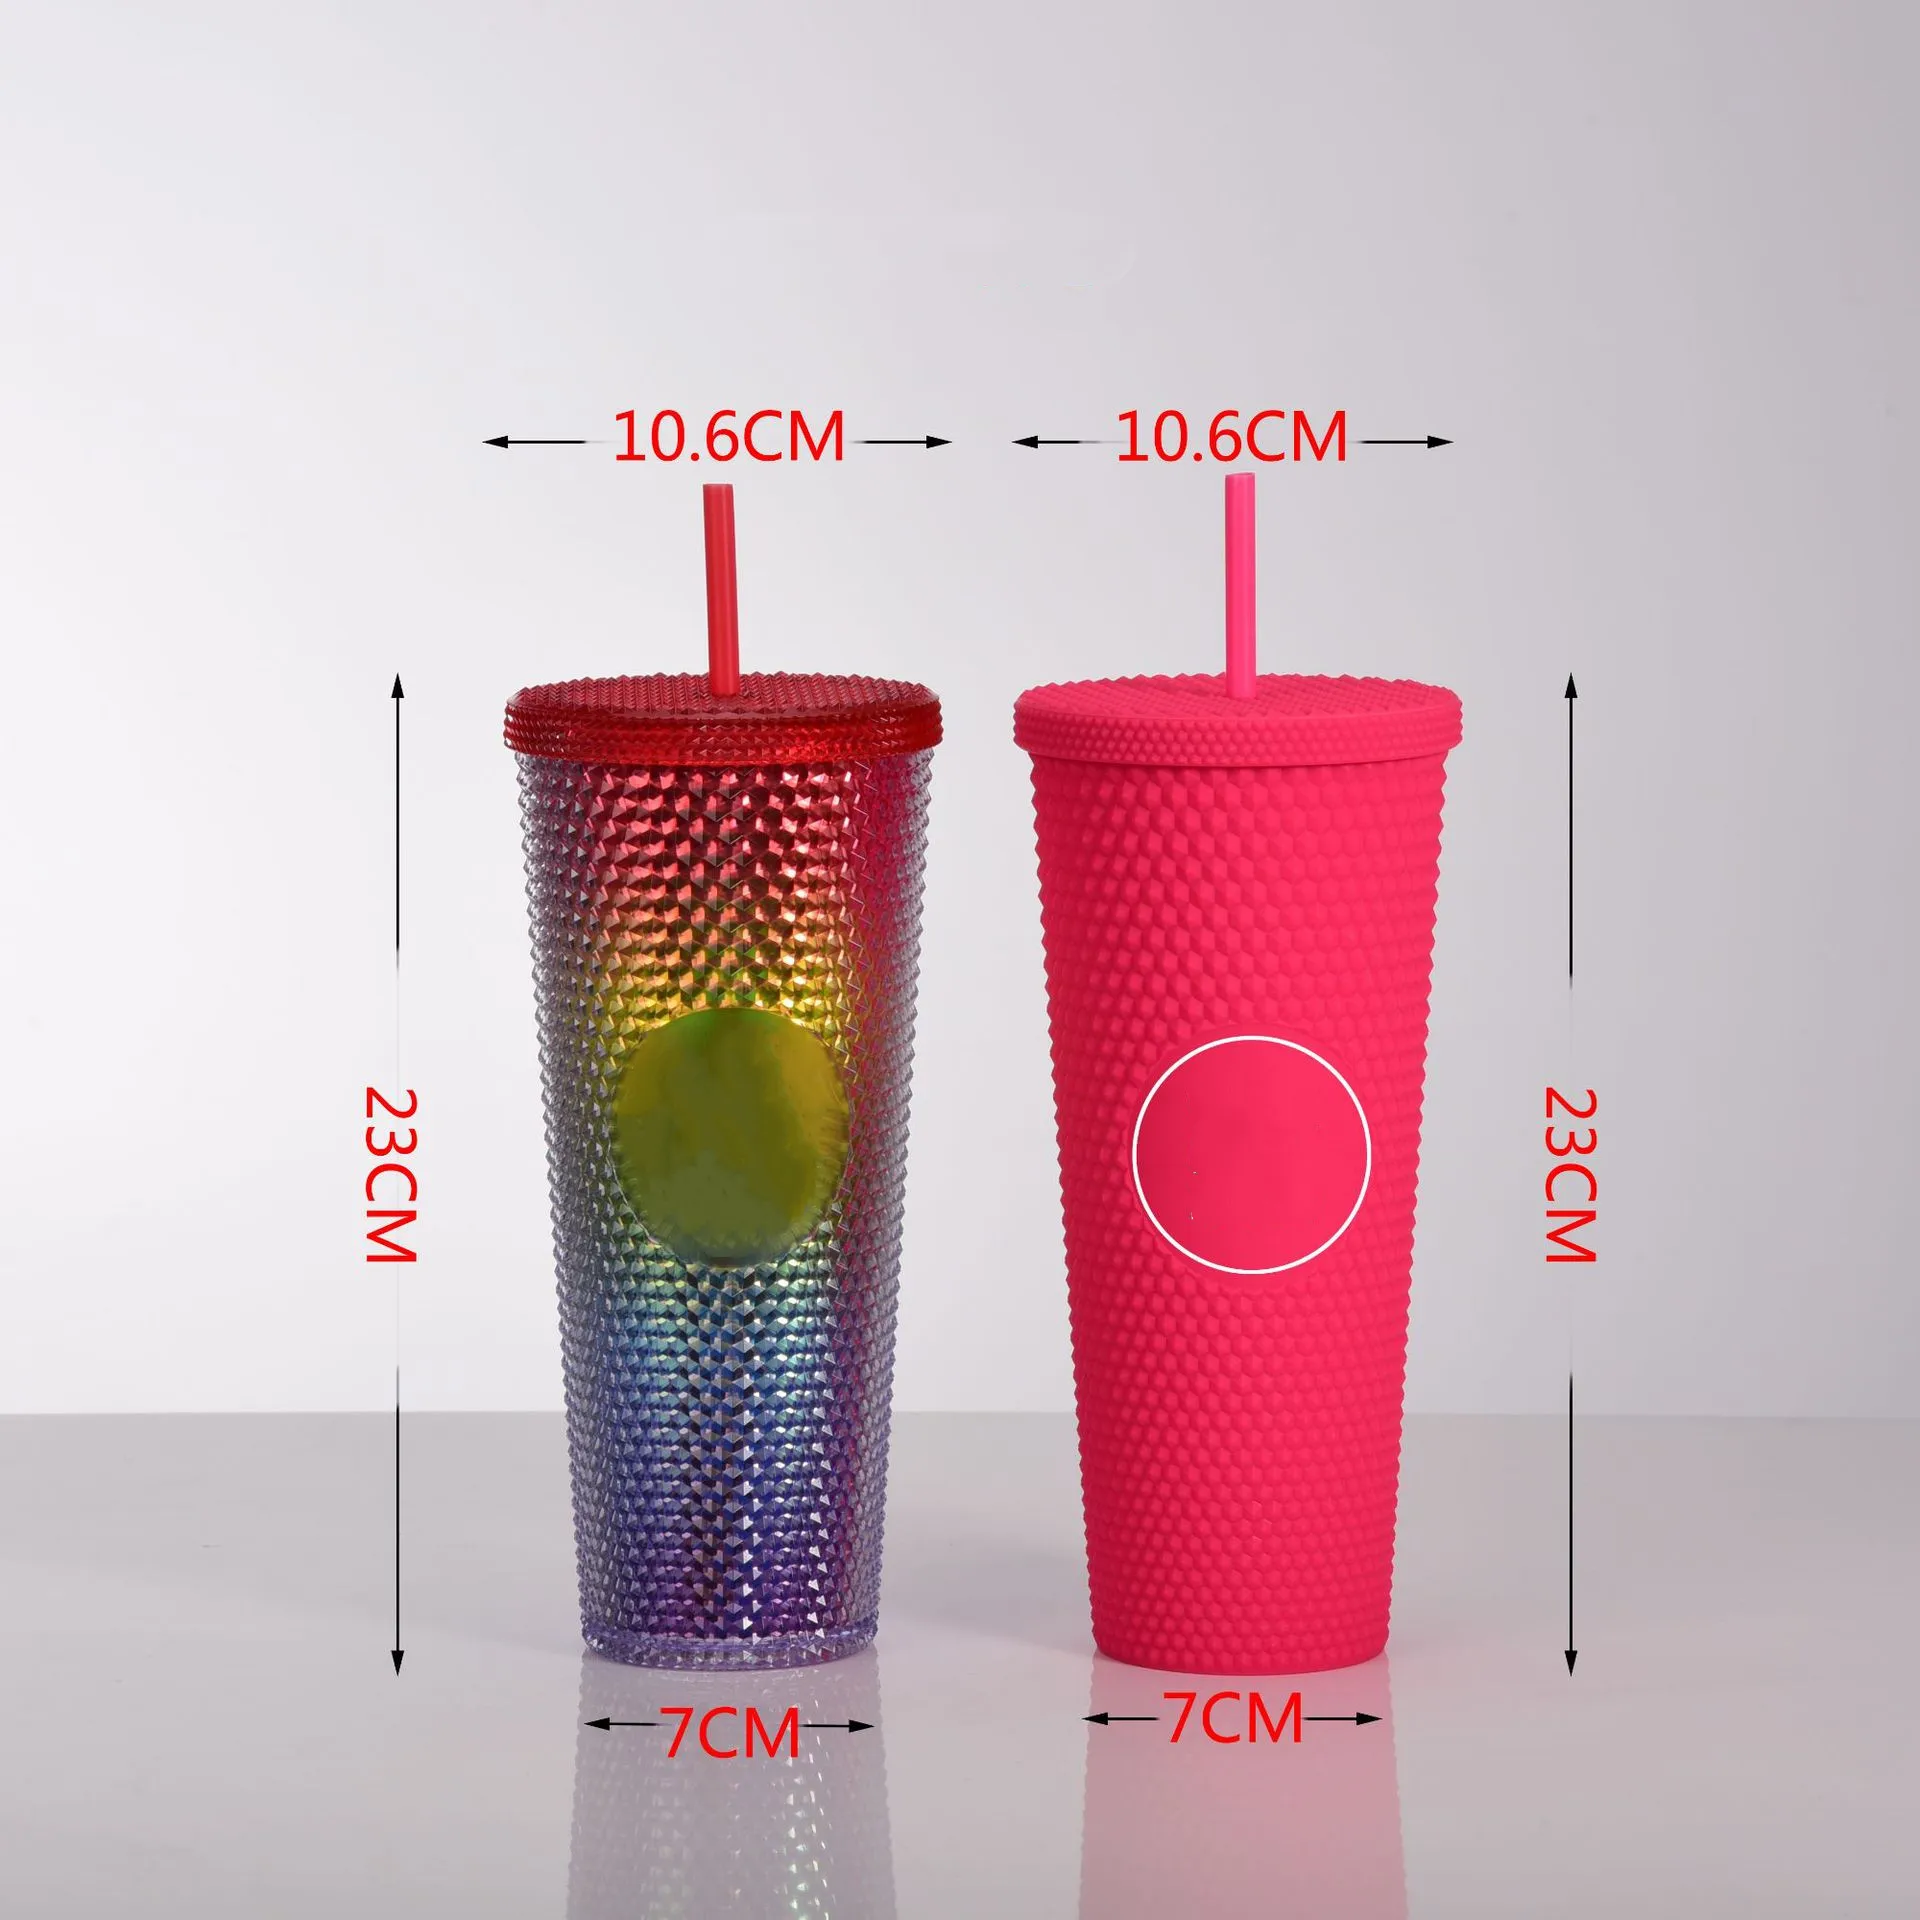 D-GROEE 710ml Color Changing Cups with Lids and Straws - Reusable